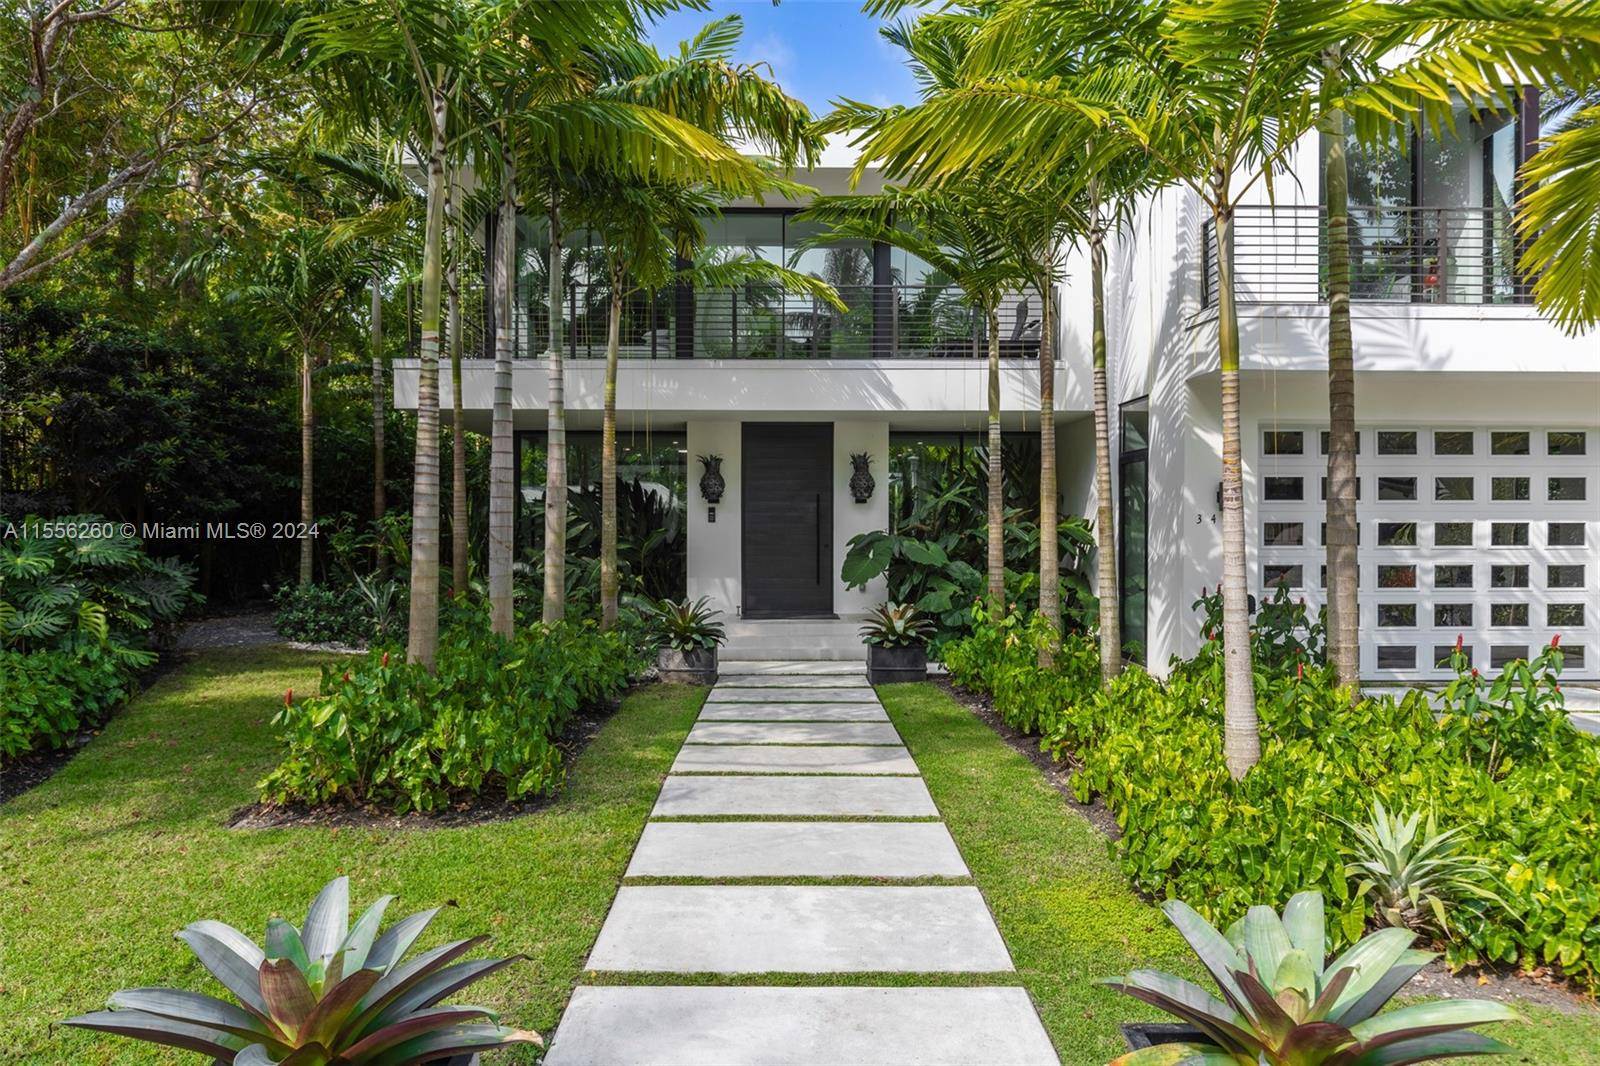 Stunning tropical modern home in the coveted guard gated community of Four Way Lodge Estates.